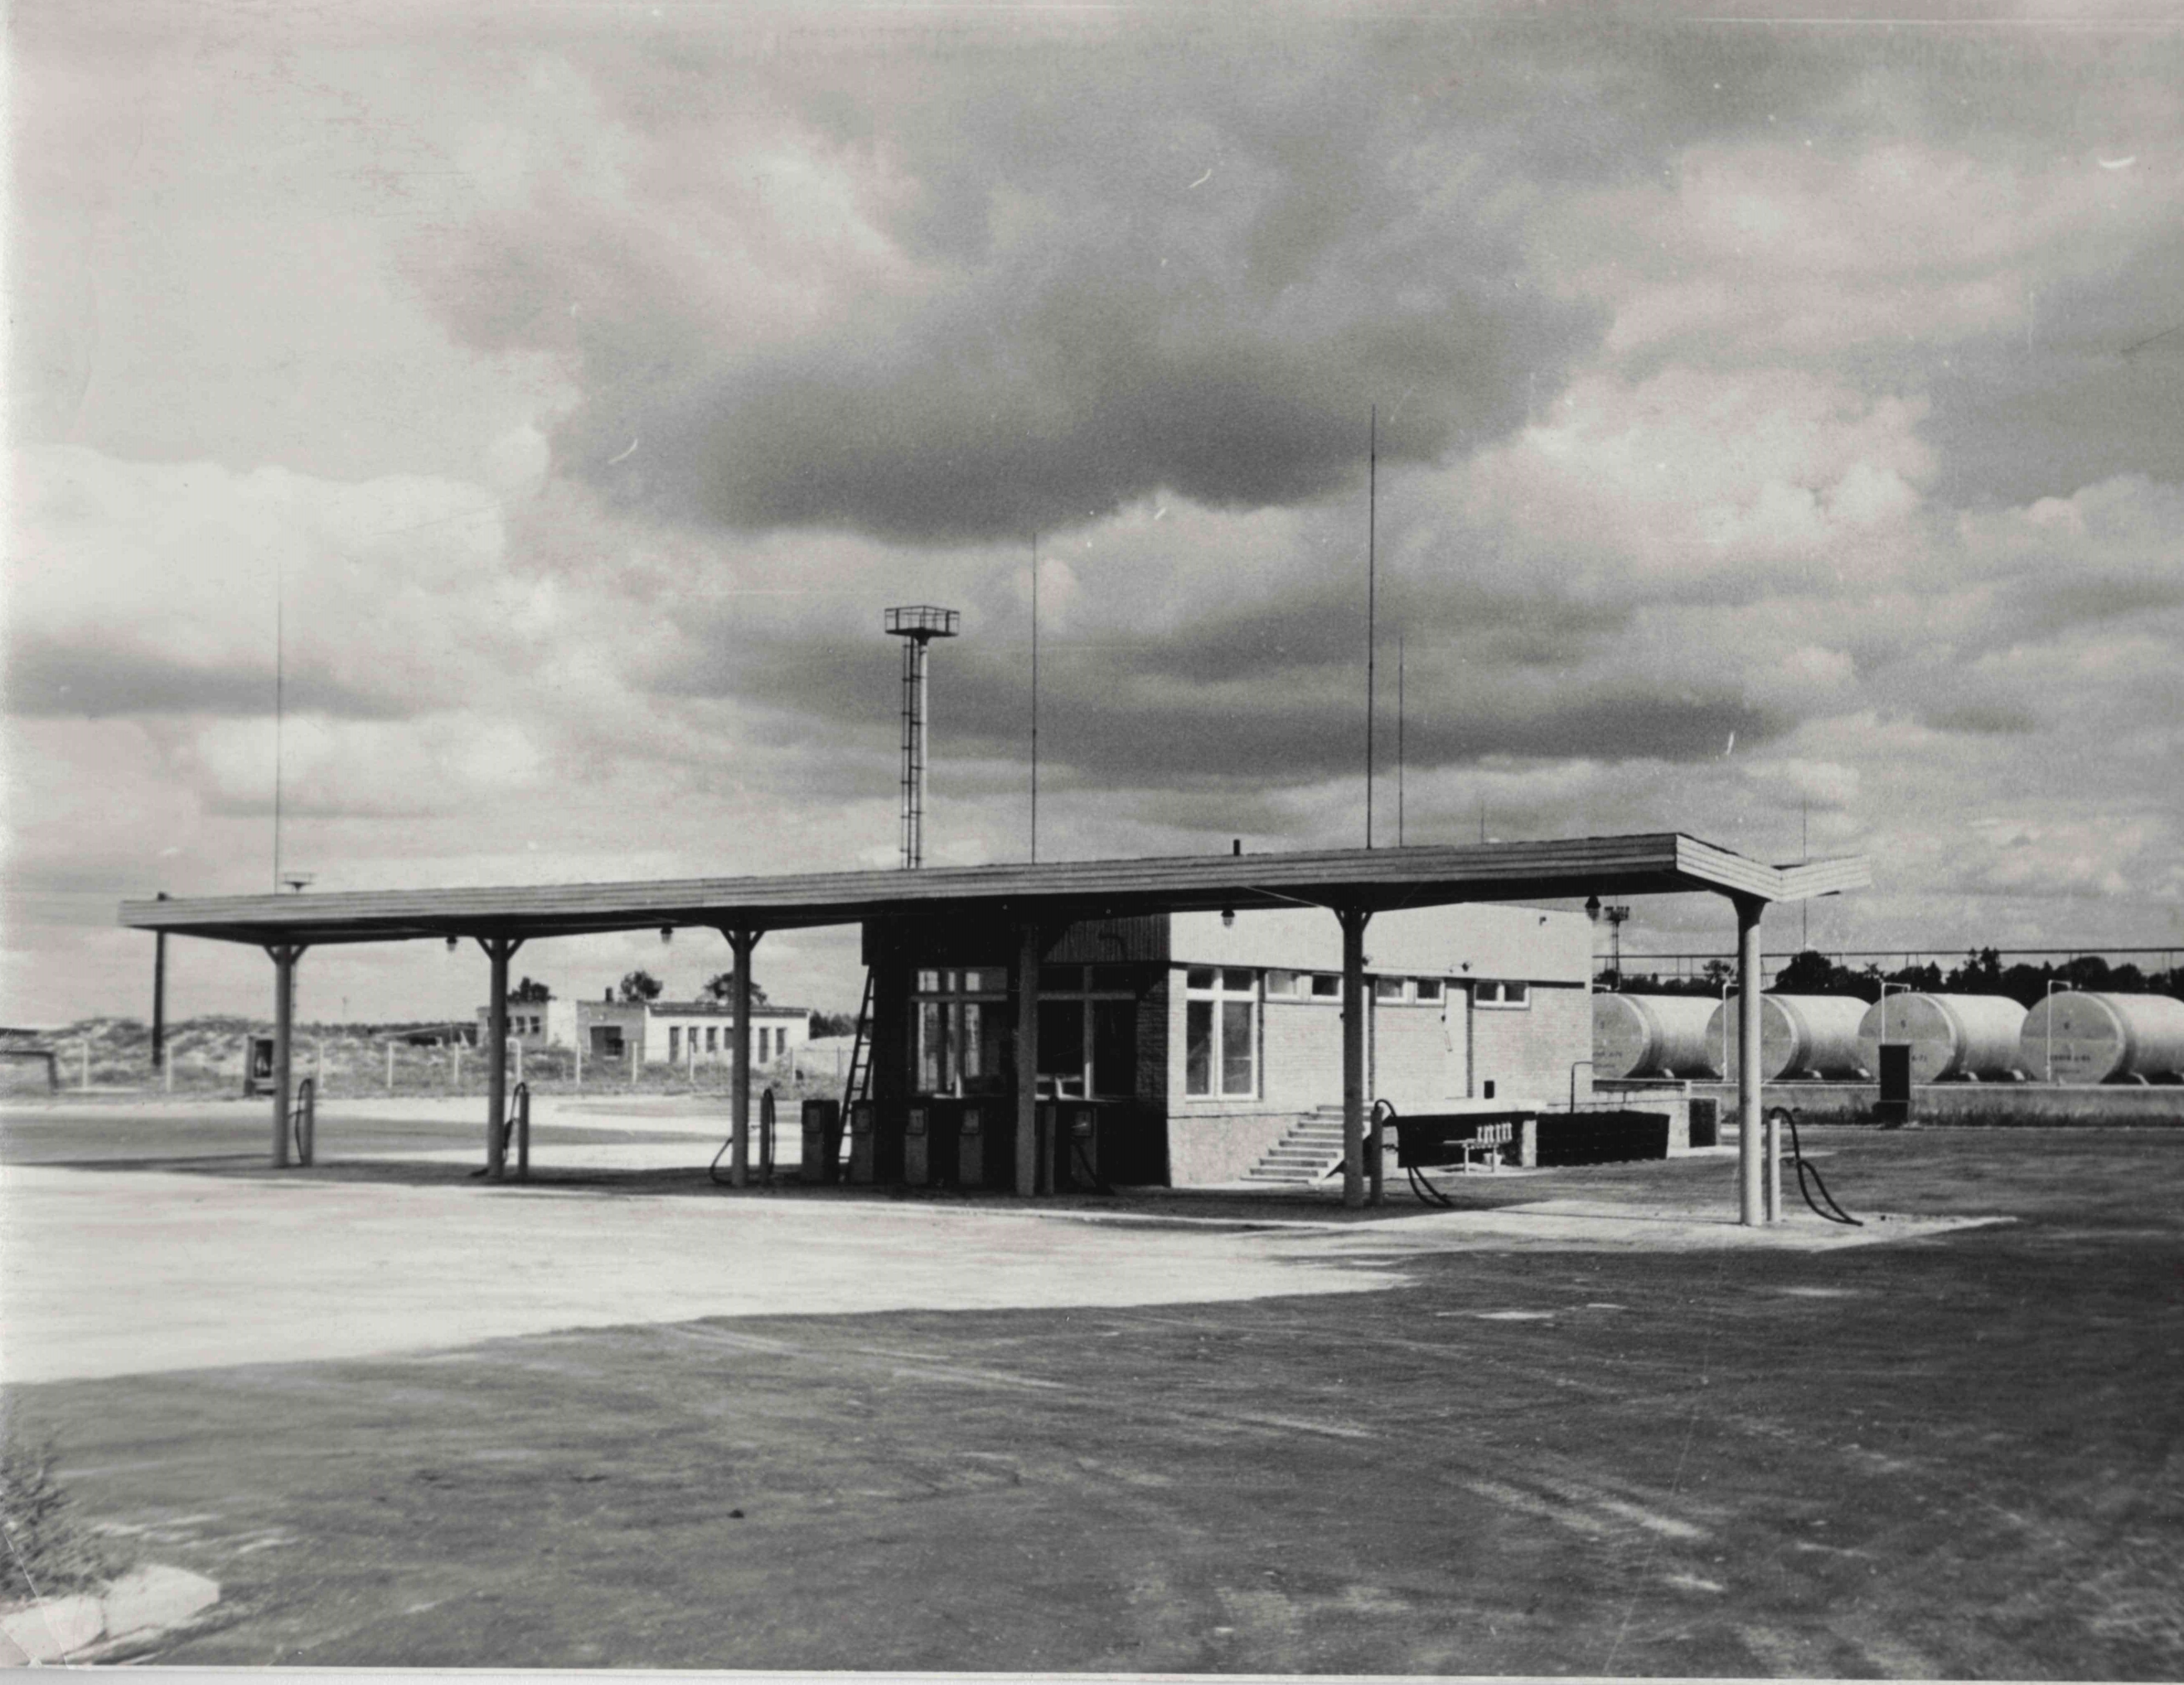 EPT Benzin Station in 1971, now Cipax